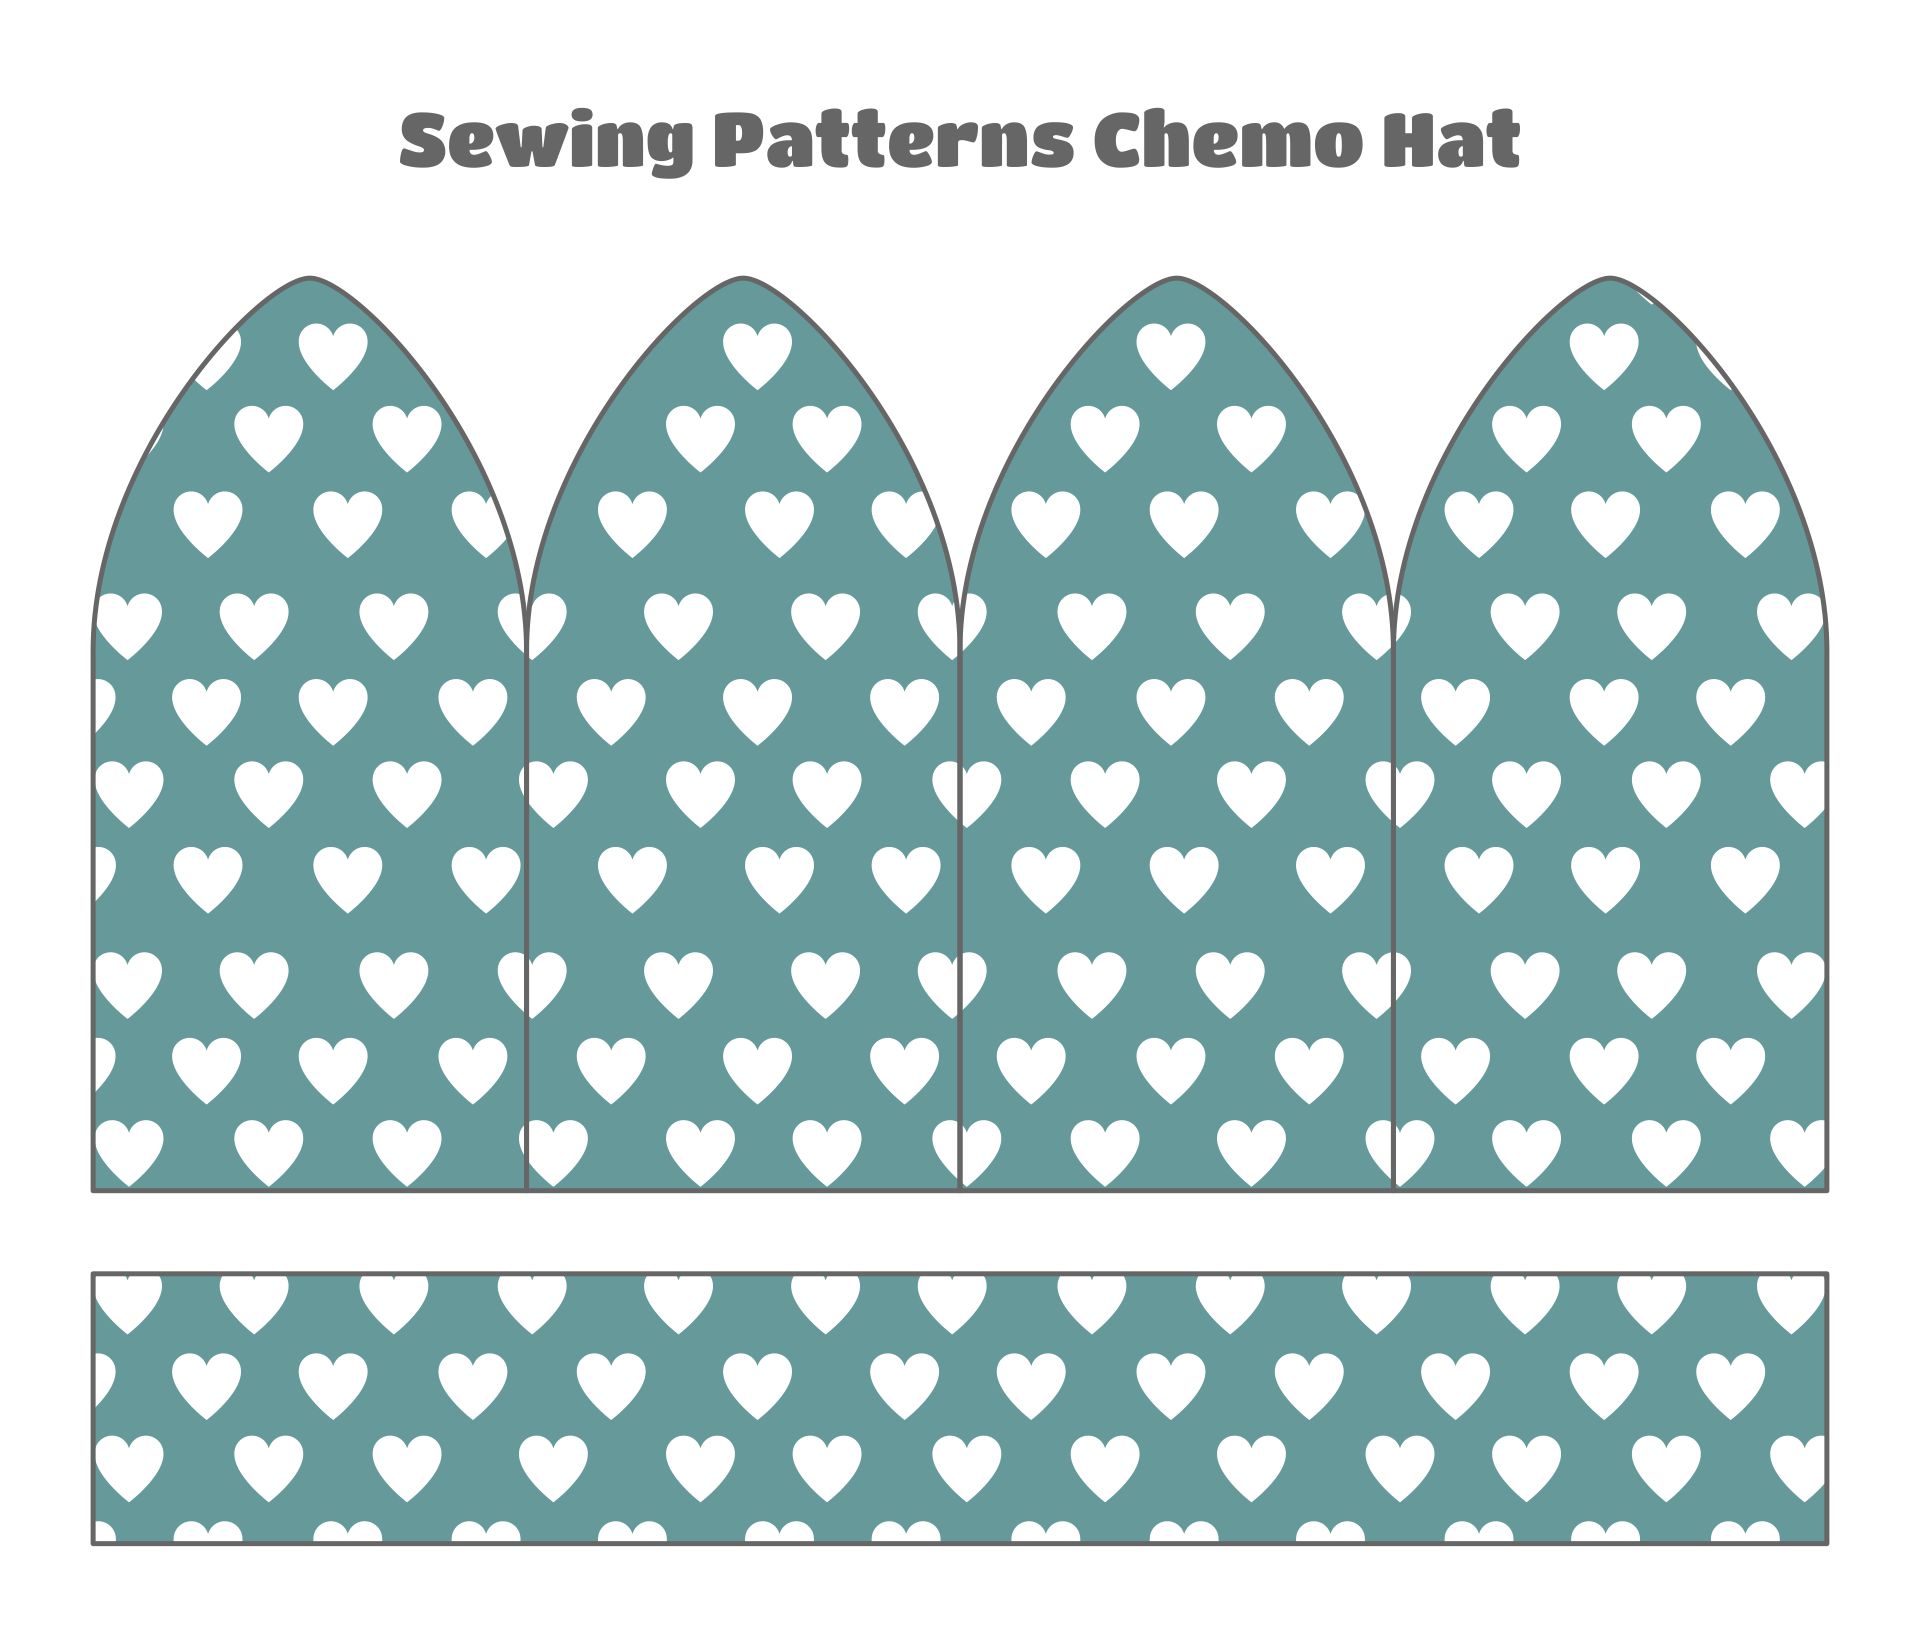 6 Best Images of Printable Sewing Patterns Chemo Hat Free Sewing